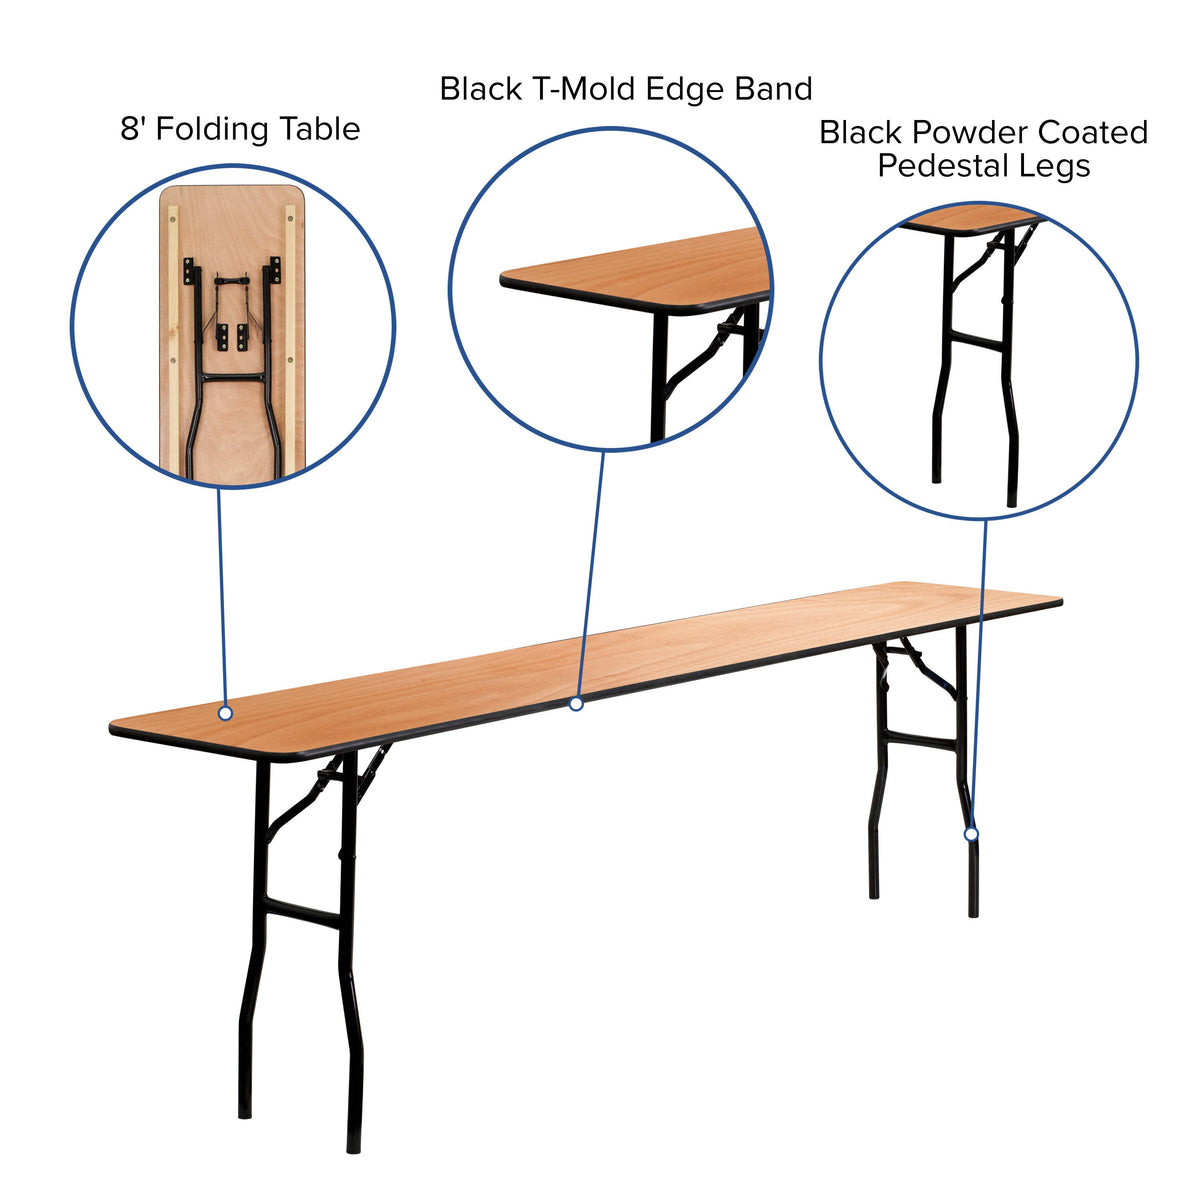 8-Foot Rectangular Wood Folding Training / Seminar Table with Clear Coated Top